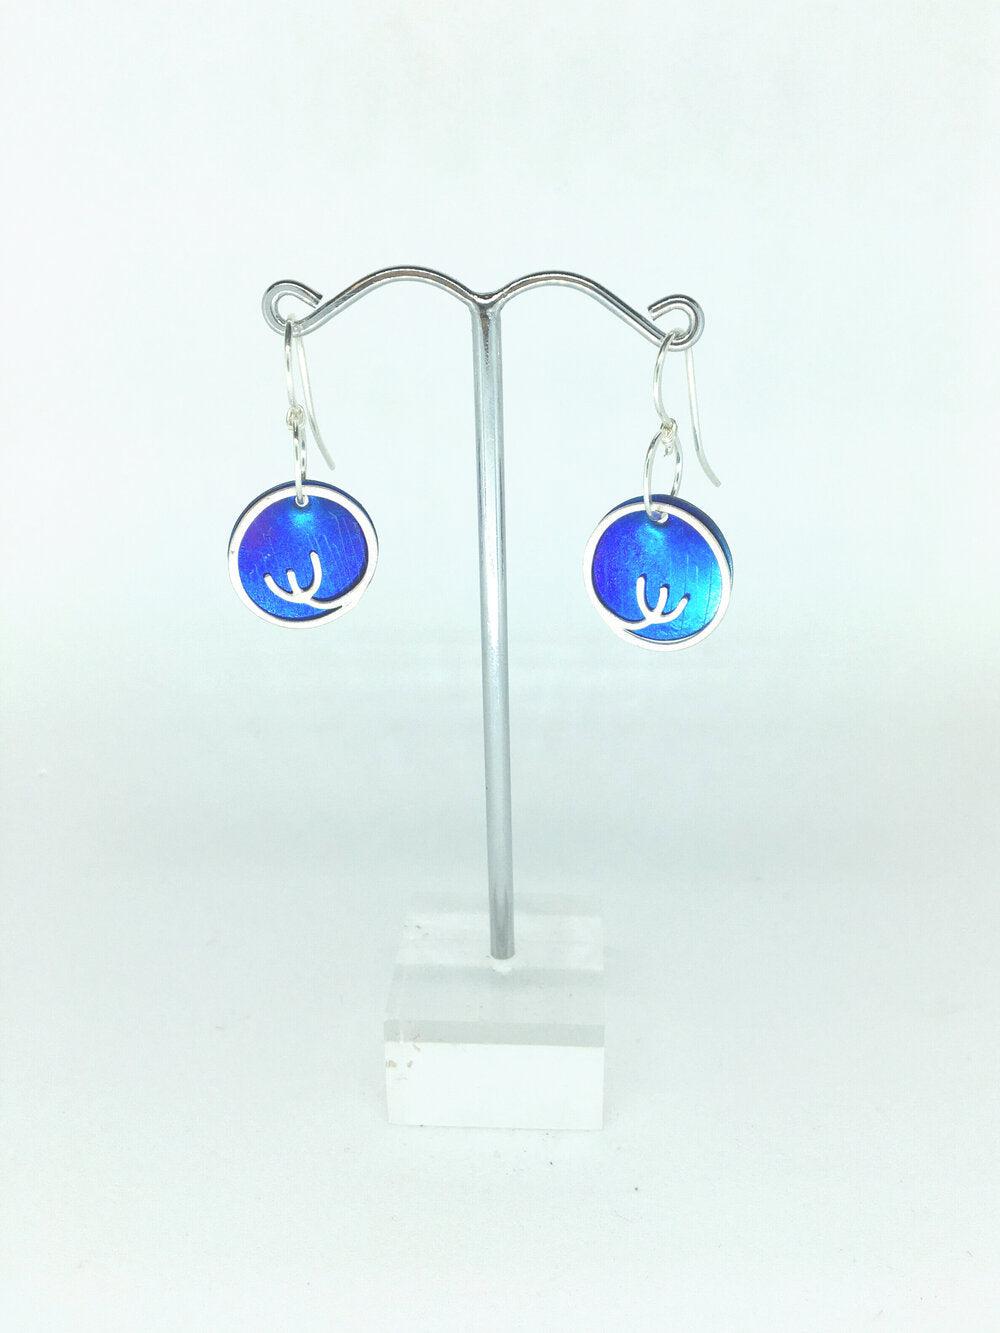 Round and Plant Stem Drops - The Nancy Smillie Shop - Art, Jewellery & Designer Gifts Glasgow